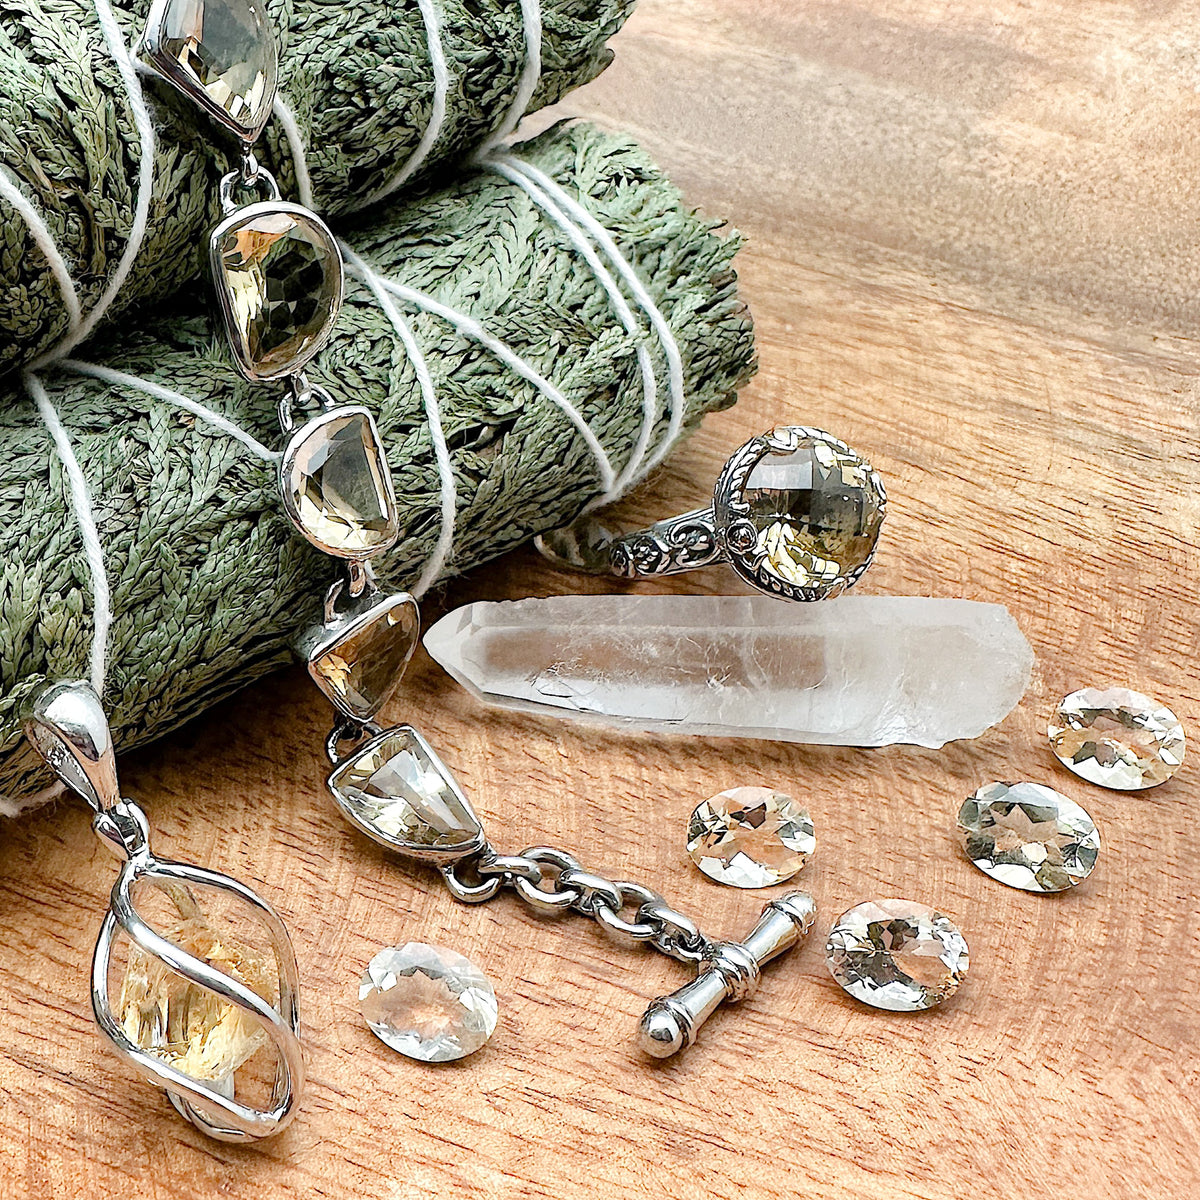 Shot of various different pieces of Citrine jewelry placed together. It includes a citrine pendant, a citrine bracelet, a citrine ring and multiple decorative stones